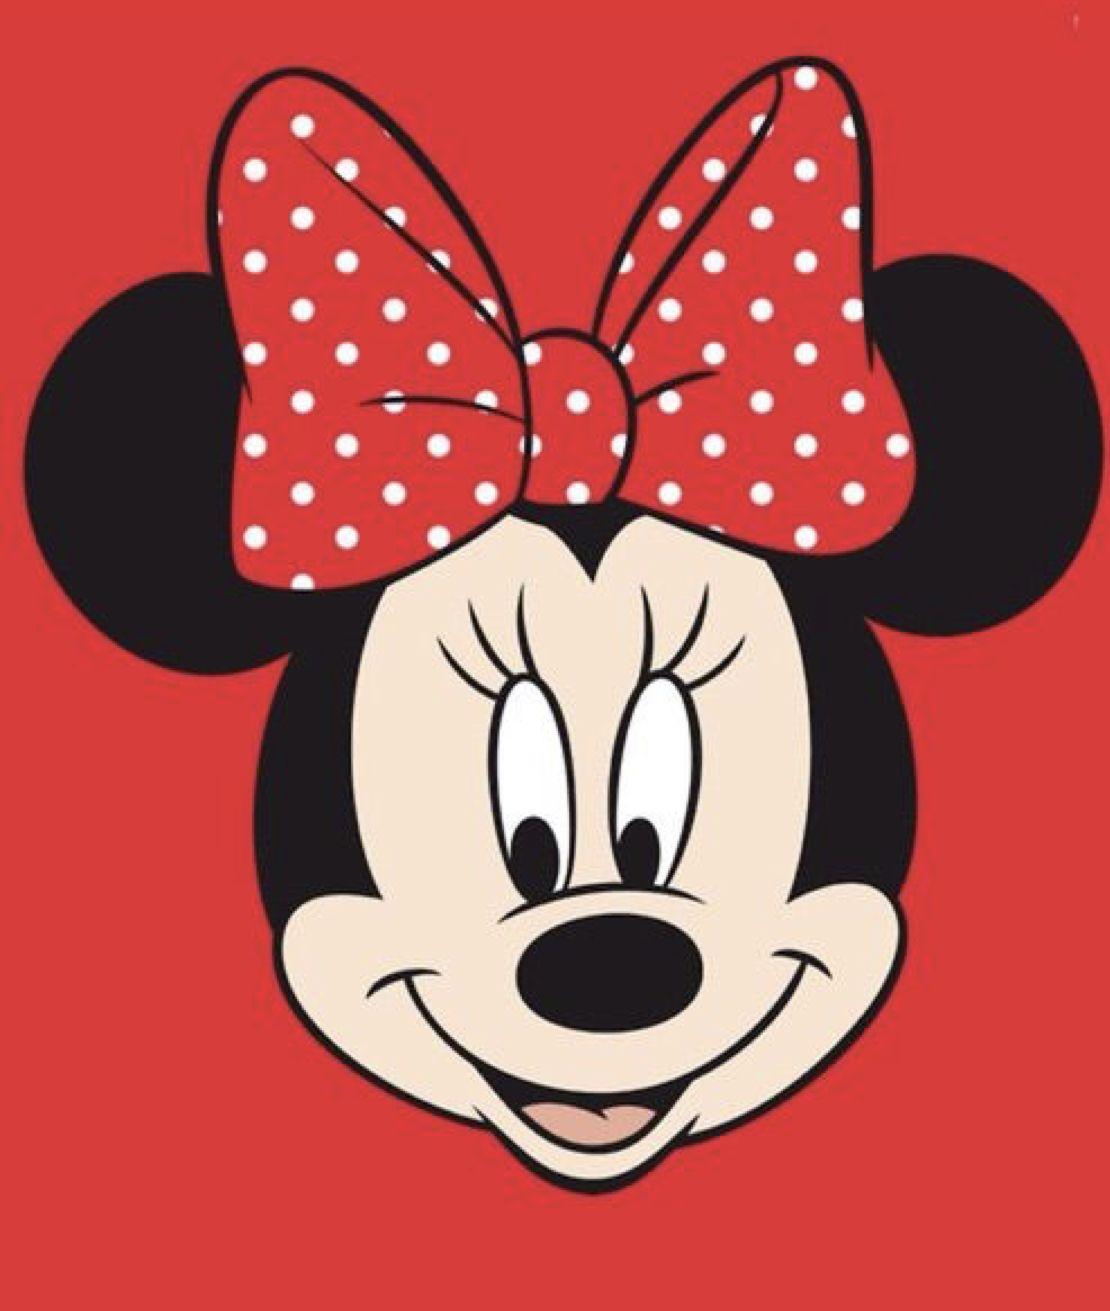 Red Minnie Mouse Wallpapers - Top Free Red Minnie Mouse ...